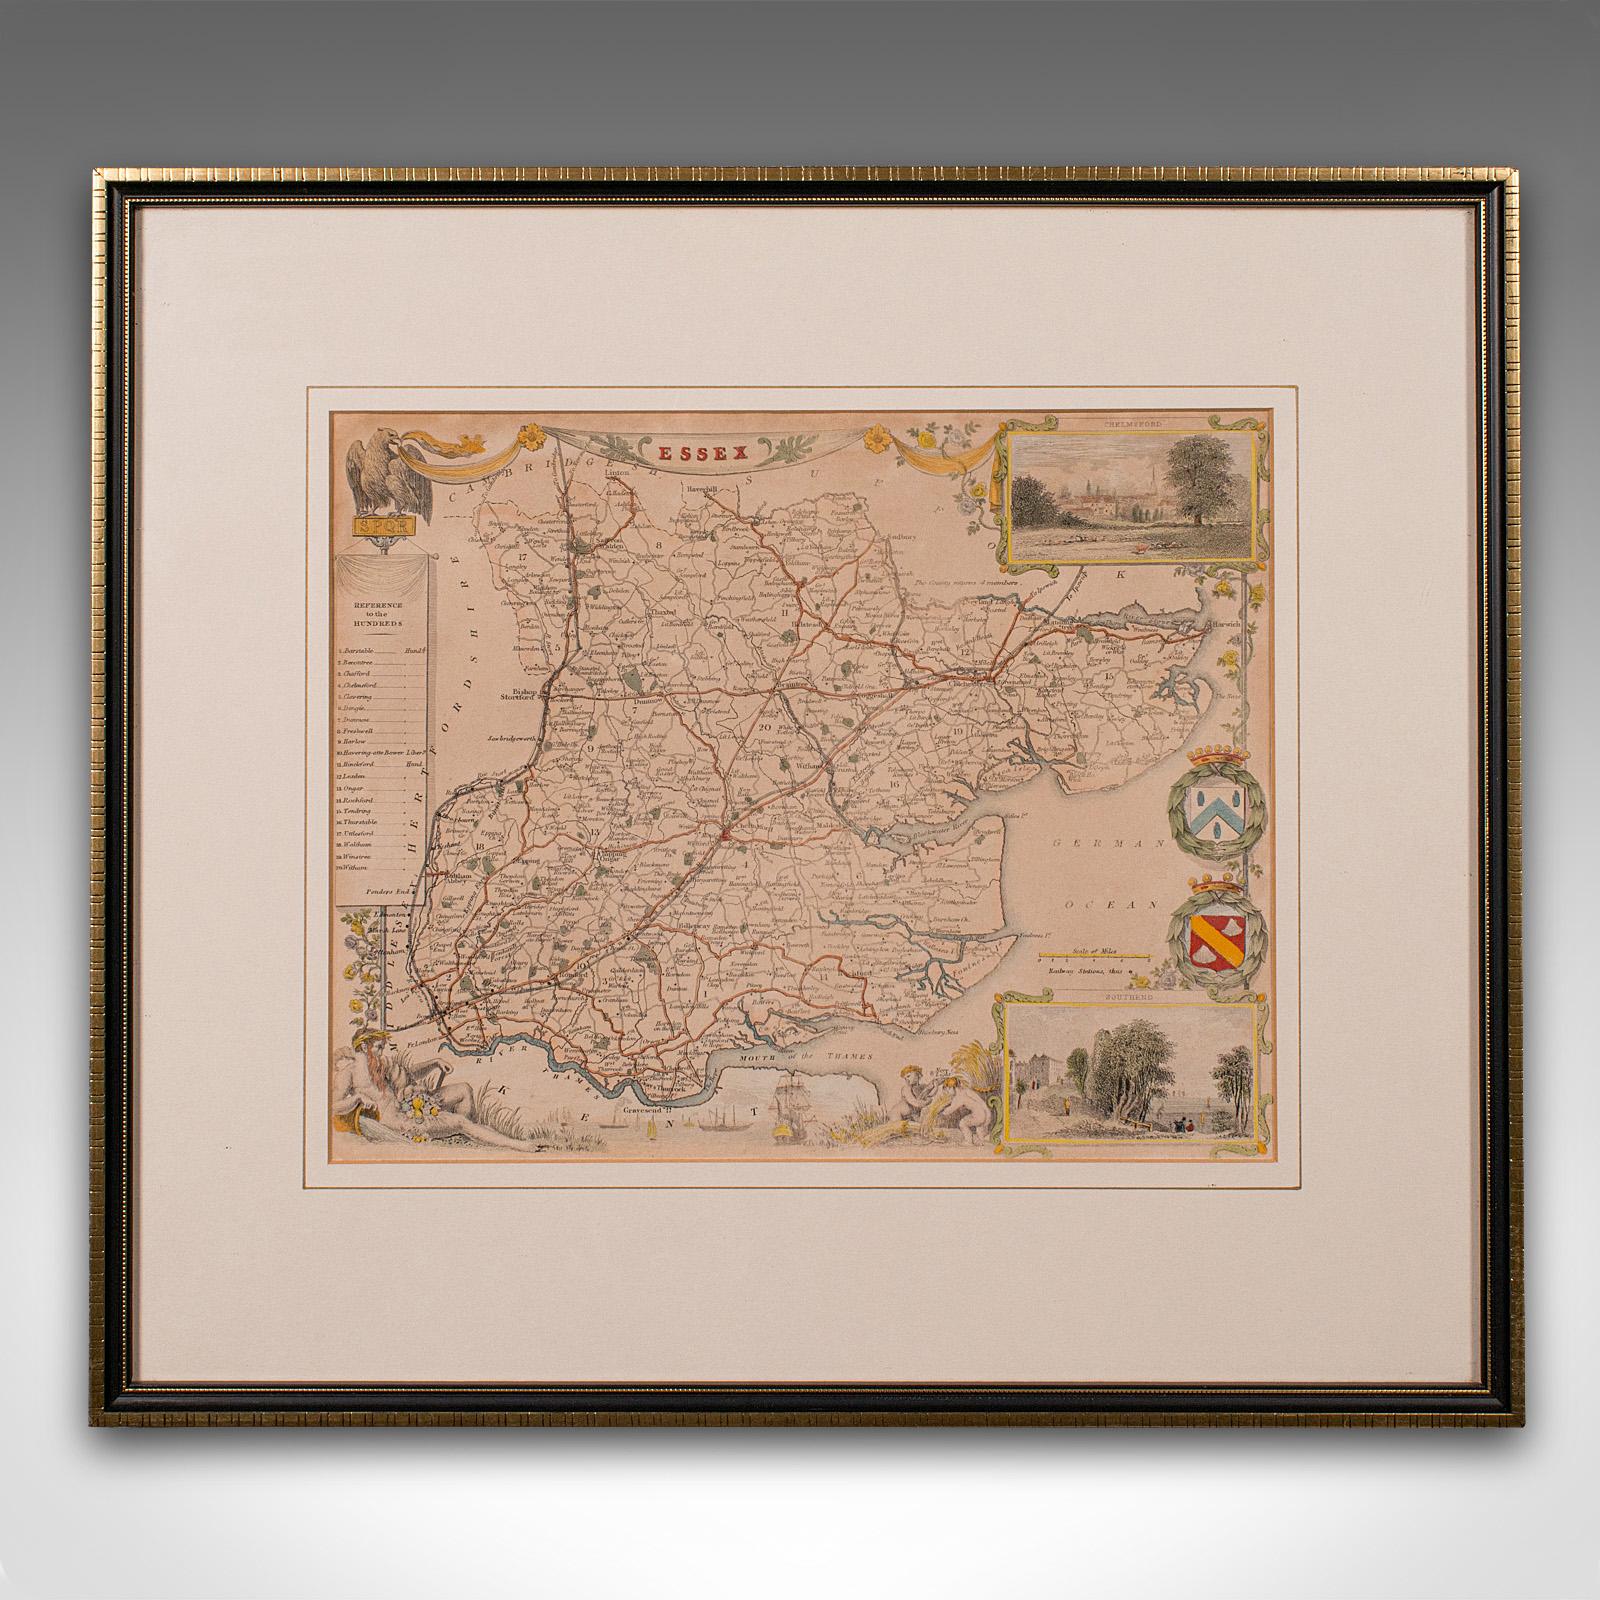 
This is an antique lithography map of Essex. An English, framed atlas engraving of cartographic interest, dating to the mid 19th century and later.

Superb lithography of Essex and its county detail, perfect for display
Displaying a desirable aged